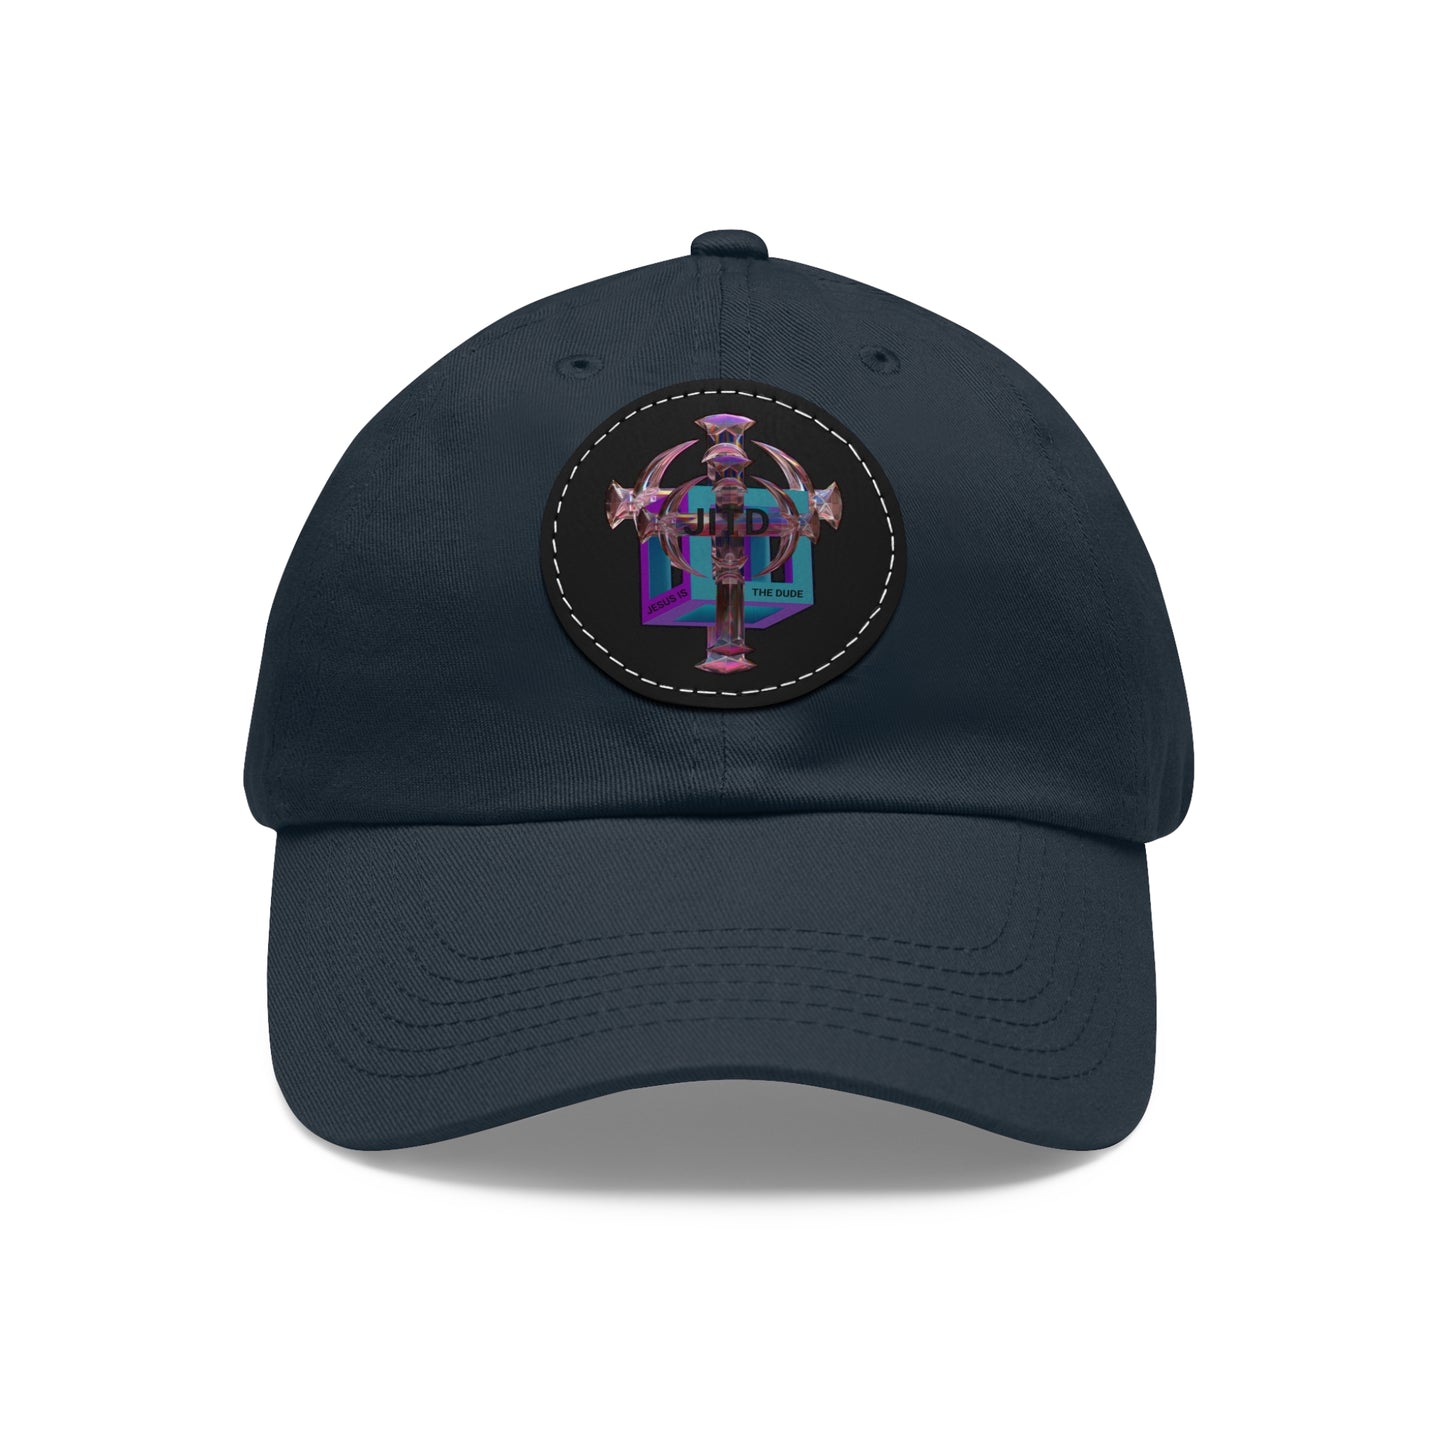 JITD 3D BOX CROSS HAT WITH LEATHER PATCH